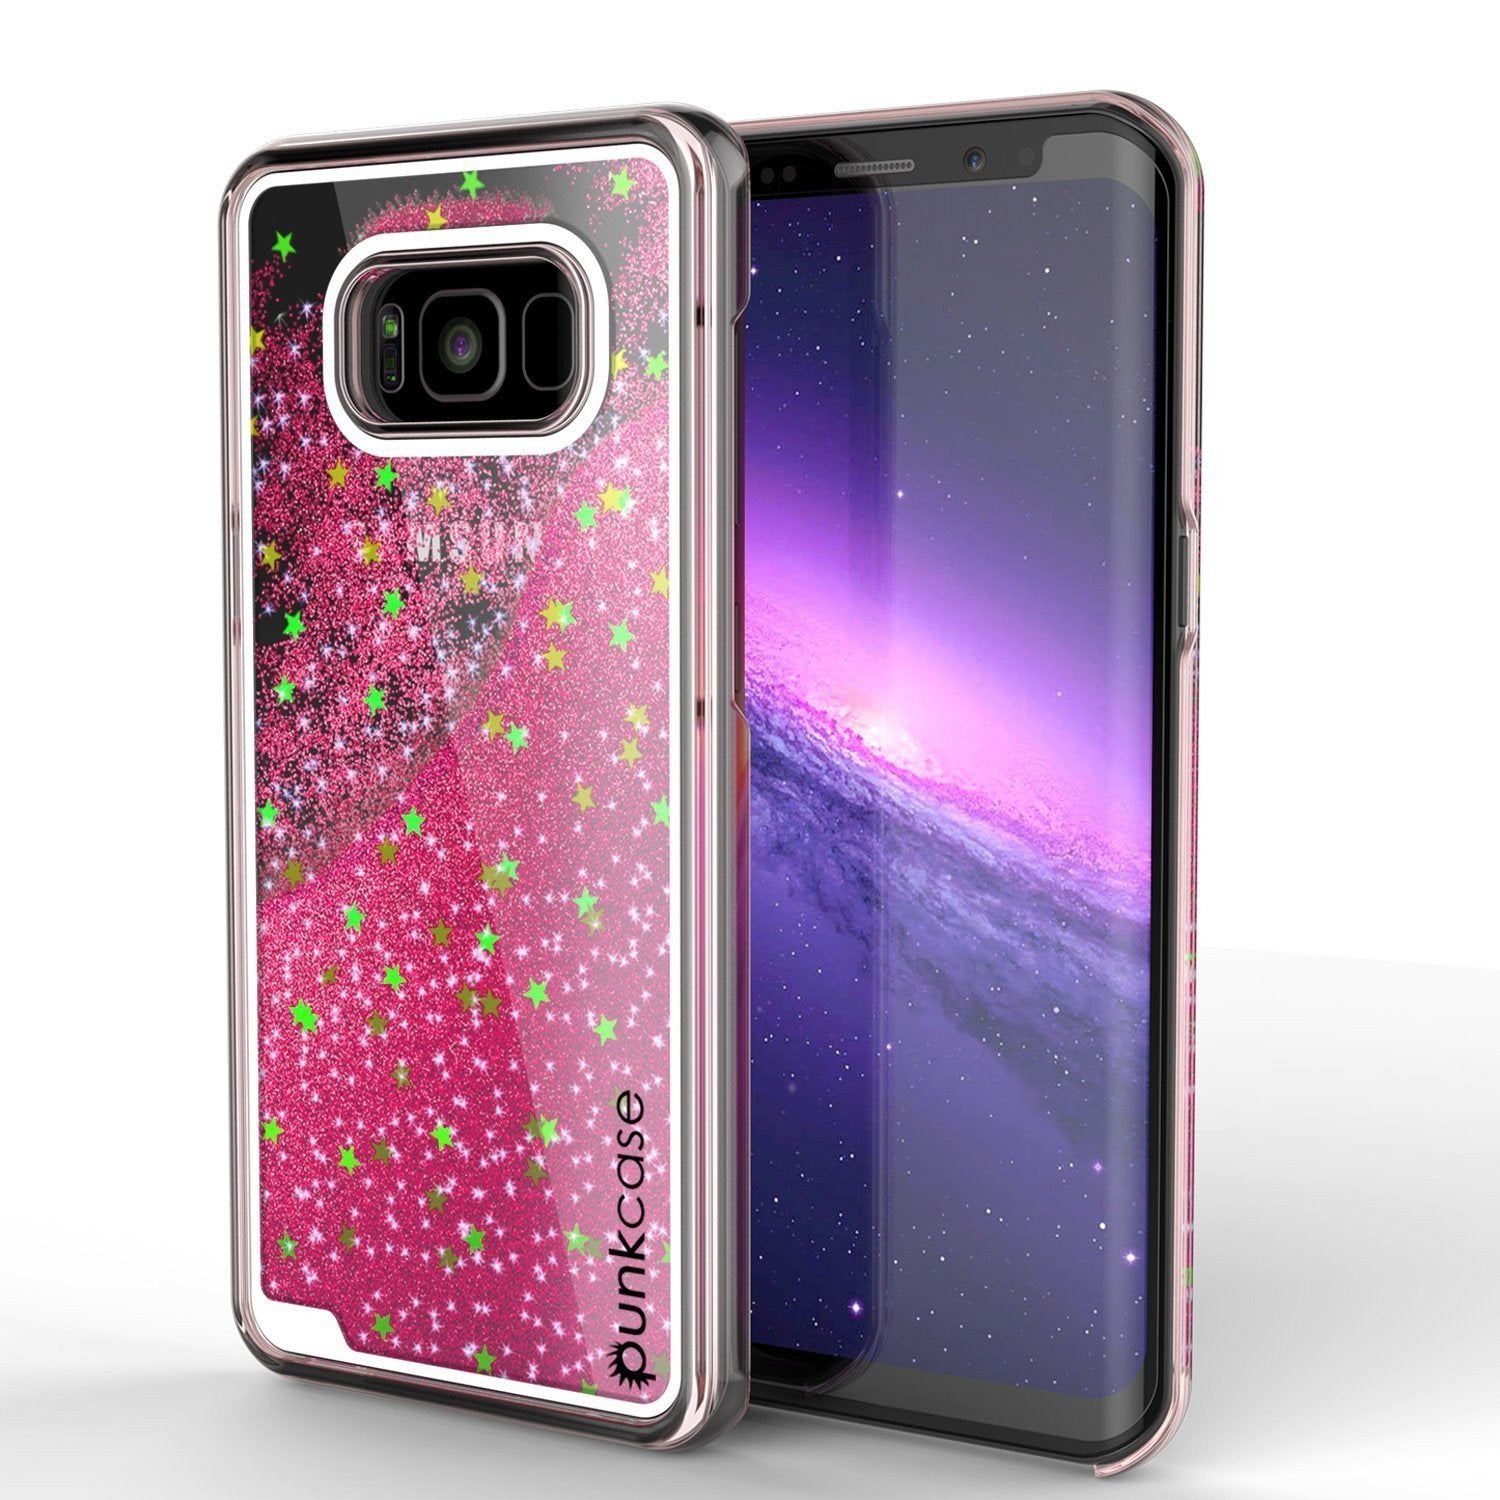 S8 Plus Case, Punkcase [Liquid Series] Protective Dual Layer Floating Glitter Cover with lots of Bling & Sparkle + PunkShield Screen Protector for Samsungs Galaxy S8+ [Pink]